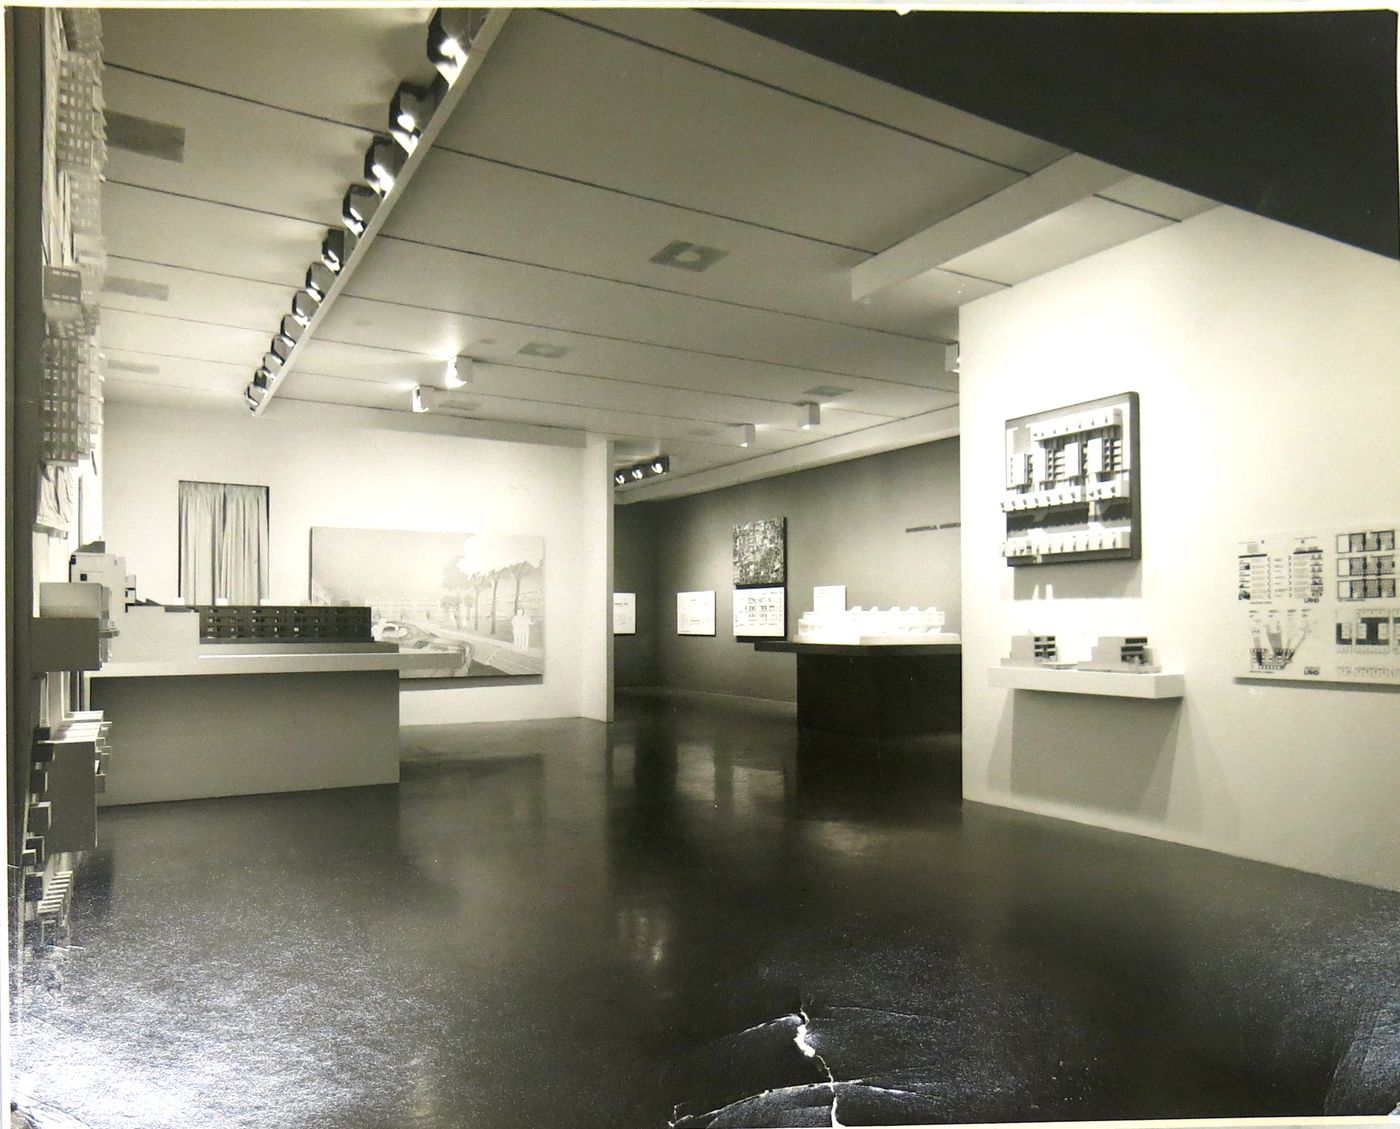 Photograph of the Low Rise High Density MoMA exhibition